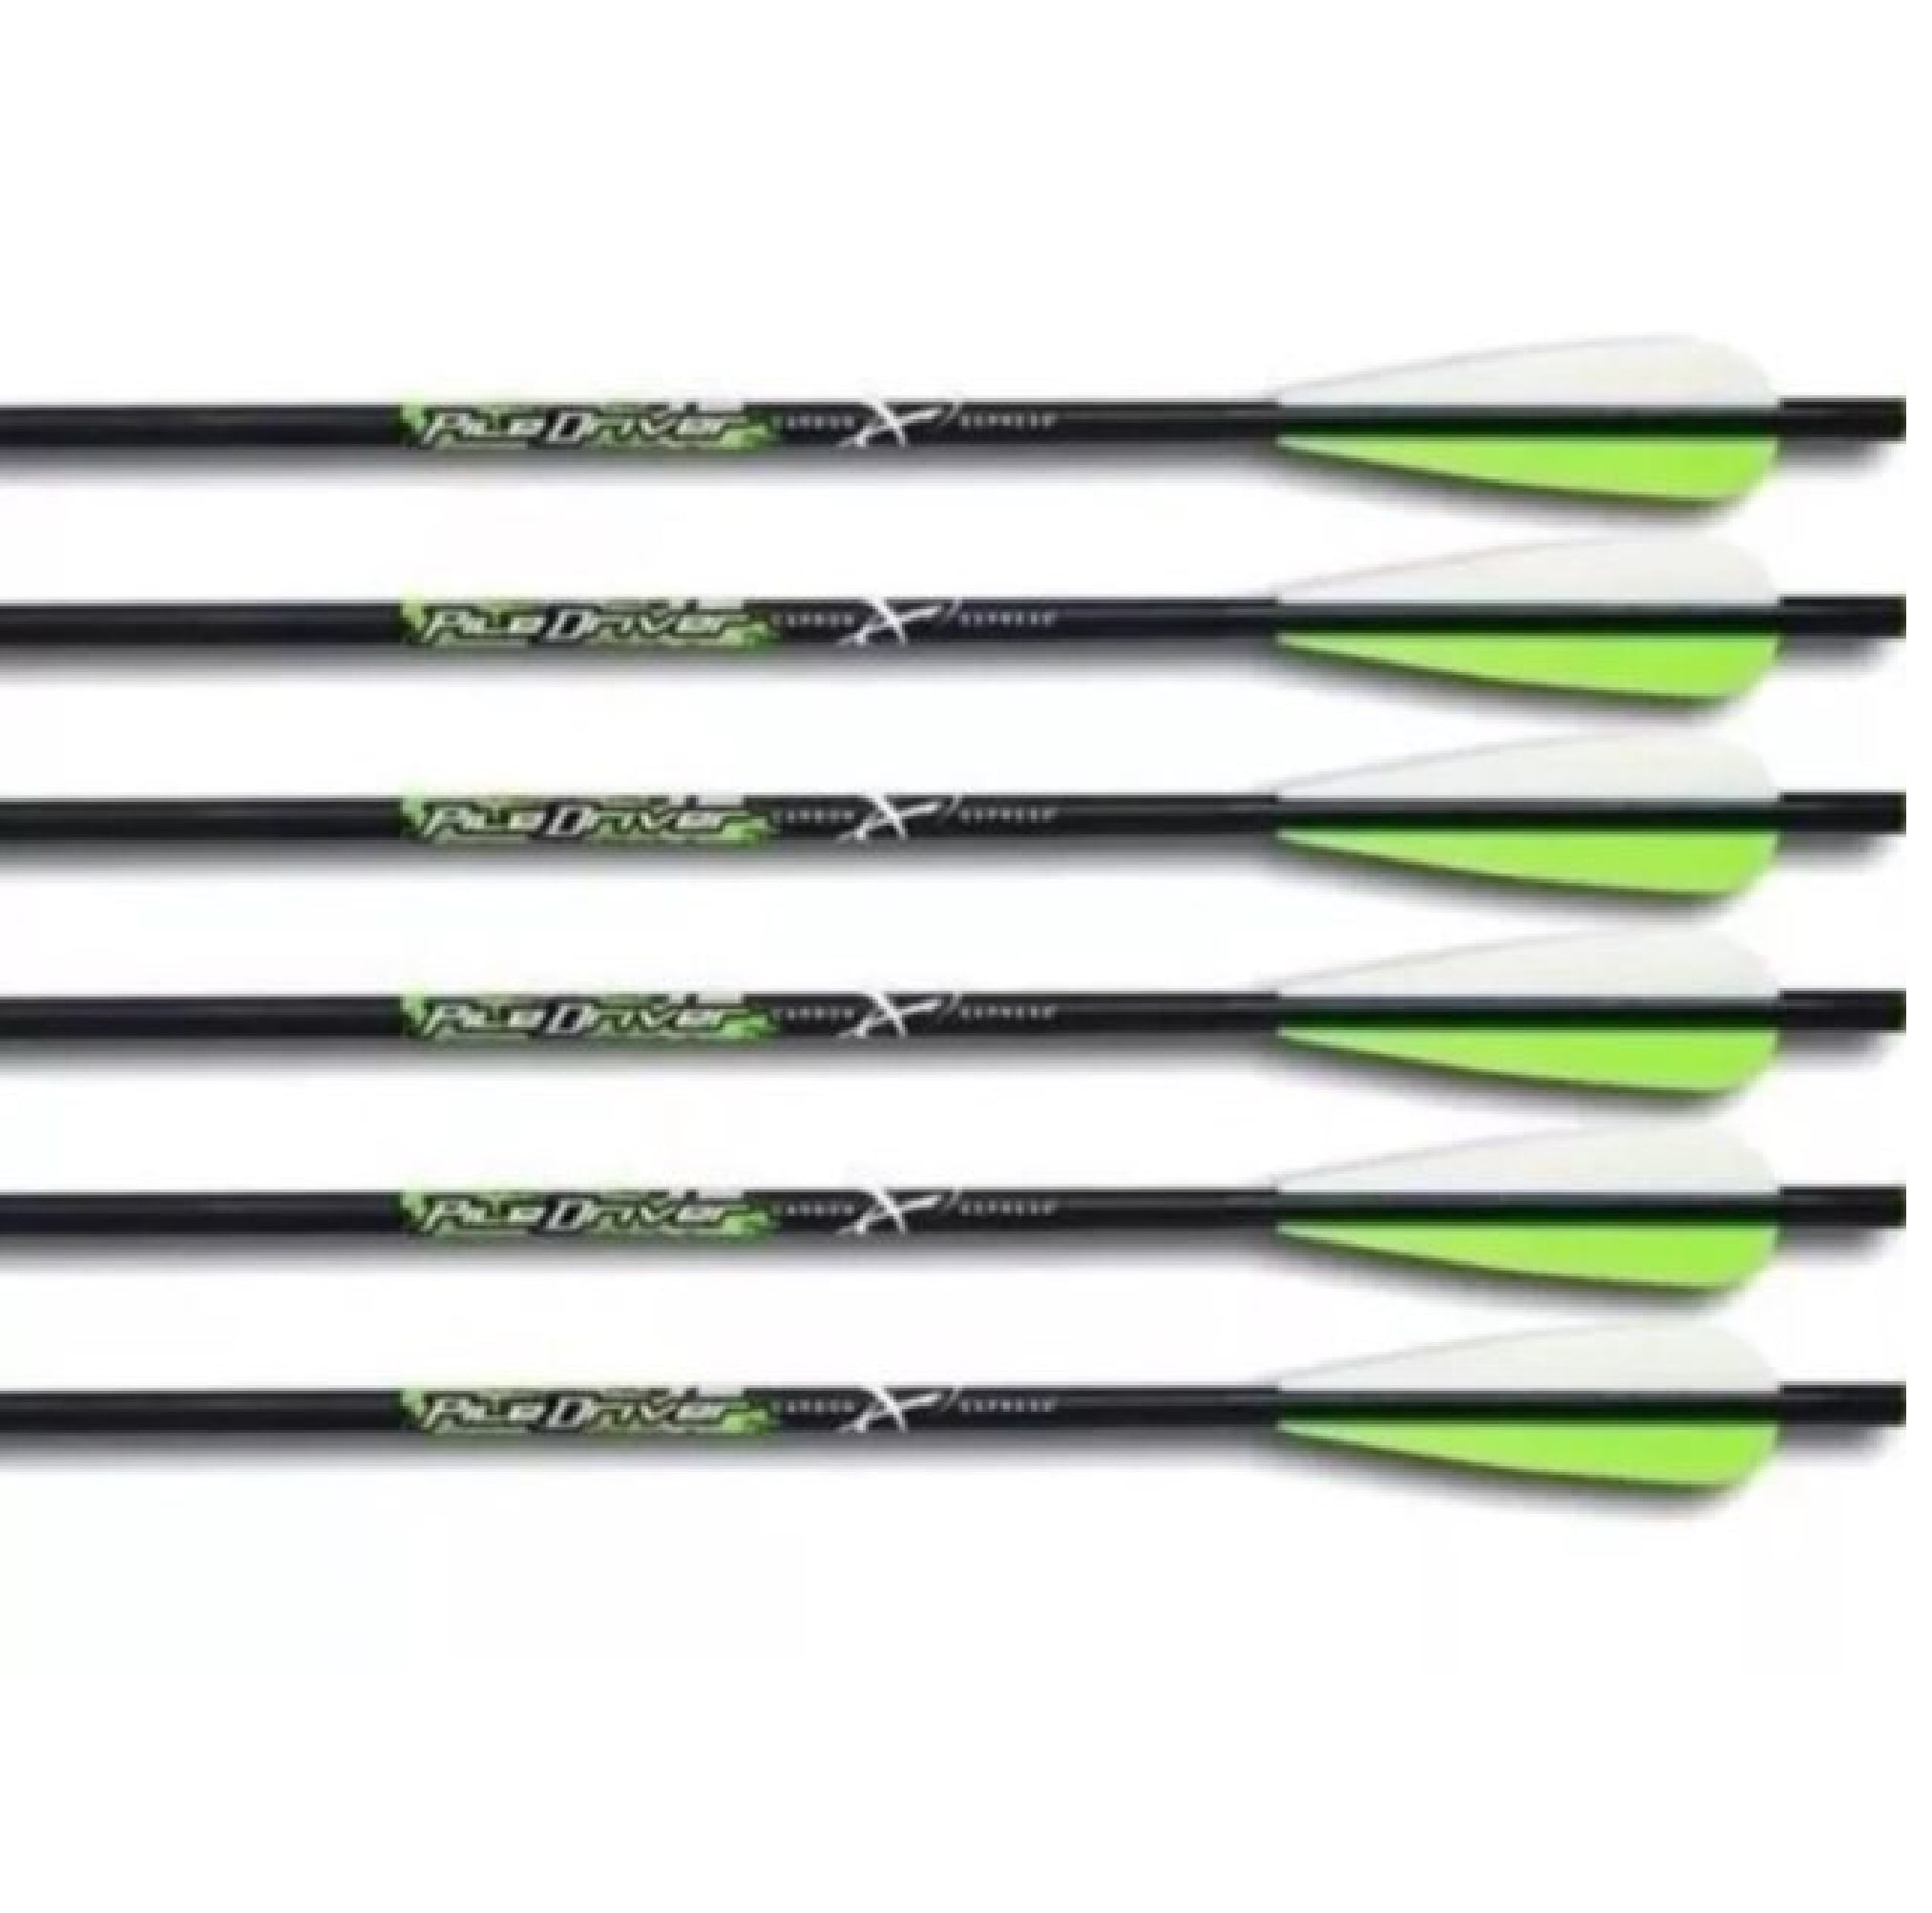 Carbon Express Pile Driver 20" 442 Grain Crossbow Bow Hunting Crossbolts 3-Pack 